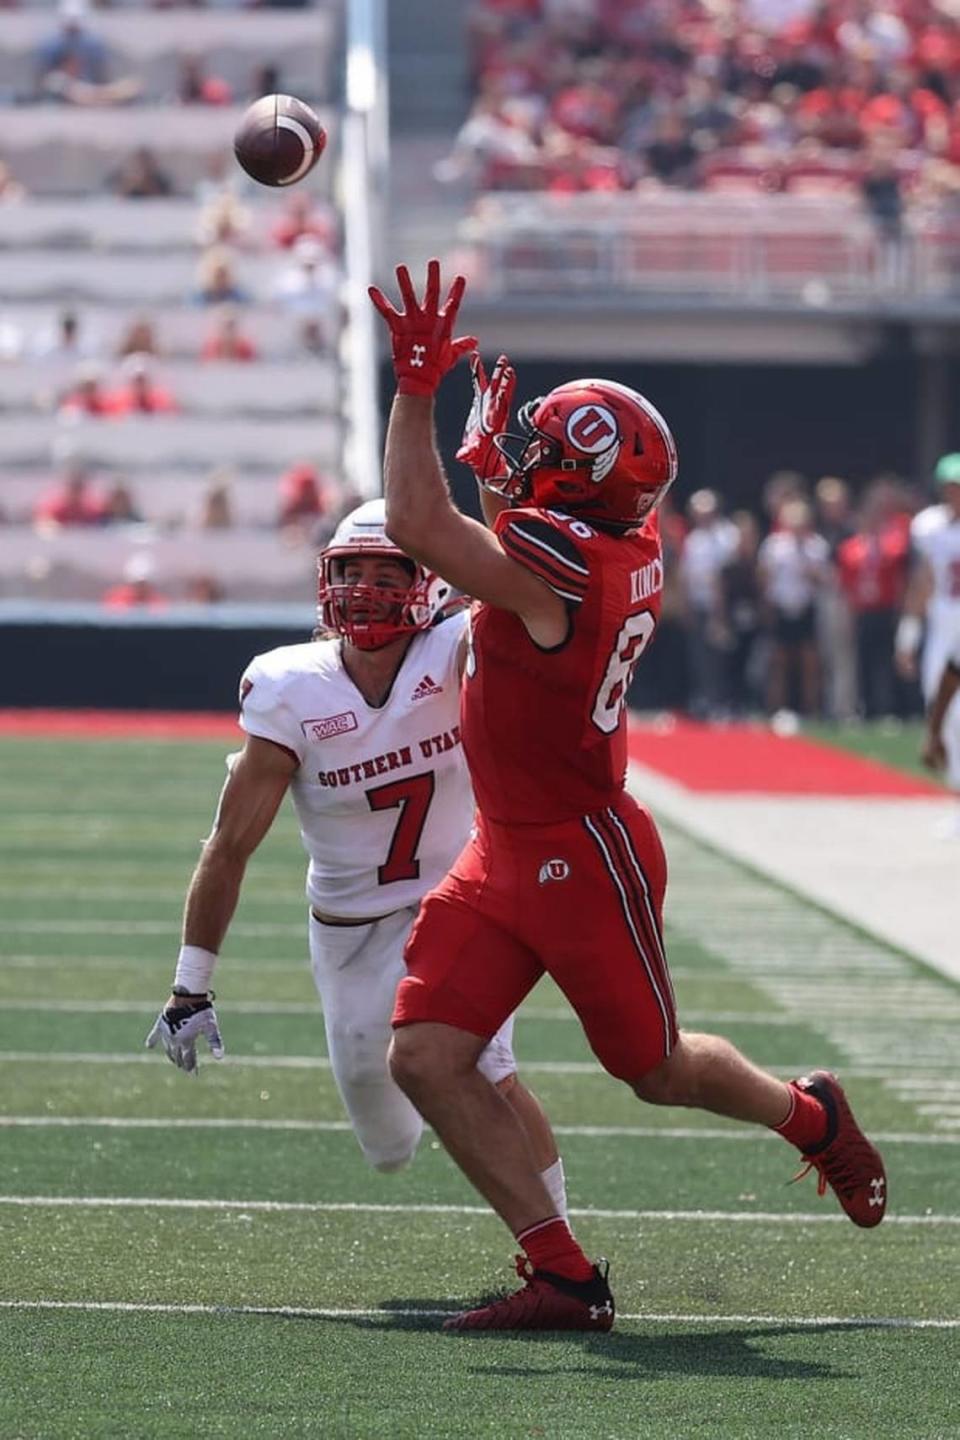 Utah Utes tight end Dalton Kincaid (86) catches a pass against Southern Utah safety Mitchell Price (7).